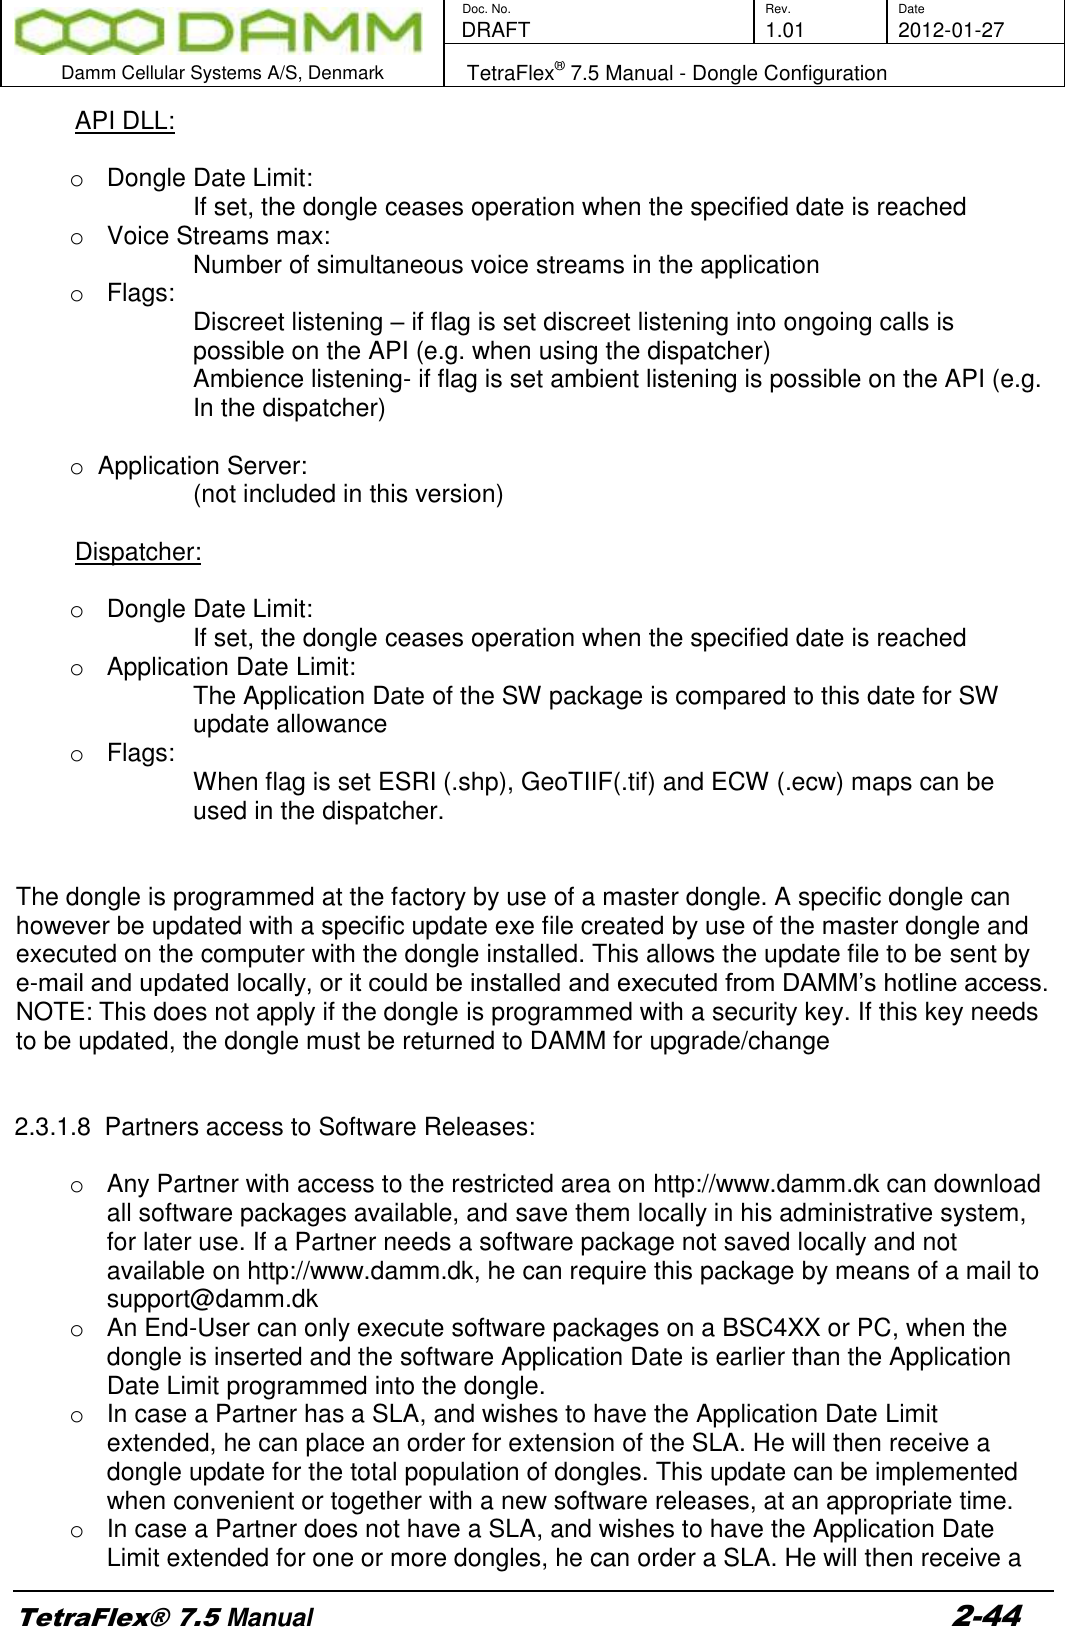        Doc. No. Rev. Date    DRAFT  1.01 2012-01-27  Damm Cellular Systems A/S, Denmark   TetraFlex® 7.5 Manual - Dongle Configuration  TetraFlex® 7.5 Manual 2-44 API DLL:  o  Dongle Date Limit: If set, the dongle ceases operation when the specified date is reached o  Voice Streams max: Number of simultaneous voice streams in the application o  Flags:  Discreet listening – if flag is set discreet listening into ongoing calls is possible on the API (e.g. when using the dispatcher) Ambience listening- if flag is set ambient listening is possible on the API (e.g. In the dispatcher)  o  Application Server: (not included in this version)  Dispatcher:  o  Dongle Date Limit: If set, the dongle ceases operation when the specified date is reached o  Application Date Limit: The Application Date of the SW package is compared to this date for SW update allowance o  Flags:  When flag is set ESRI (.shp), GeoTIIF(.tif) and ECW (.ecw) maps can be used in the dispatcher.    The dongle is programmed at the factory by use of a master dongle. A specific dongle can however be updated with a specific update exe file created by use of the master dongle and executed on the computer with the dongle installed. This allows the update file to be sent by e-mail and updated locally, or it could be installed and executed from DAMM’s hotline access. NOTE: This does not apply if the dongle is programmed with a security key. If this key needs to be updated, the dongle must be returned to DAMM for upgrade/change   2.3.1.8  Partners access to Software Releases:  o  Any Partner with access to the restricted area on http://www.damm.dk can download all software packages available, and save them locally in his administrative system, for later use. If a Partner needs a software package not saved locally and not available on http://www.damm.dk, he can require this package by means of a mail to support@damm.dk o  An End-User can only execute software packages on a BSC4XX or PC, when the dongle is inserted and the software Application Date is earlier than the Application Date Limit programmed into the dongle. o  In case a Partner has a SLA, and wishes to have the Application Date Limit extended, he can place an order for extension of the SLA. He will then receive a dongle update for the total population of dongles. This update can be implemented when convenient or together with a new software releases, at an appropriate time. o  In case a Partner does not have a SLA, and wishes to have the Application Date Limit extended for one or more dongles, he can order a SLA. He will then receive a 